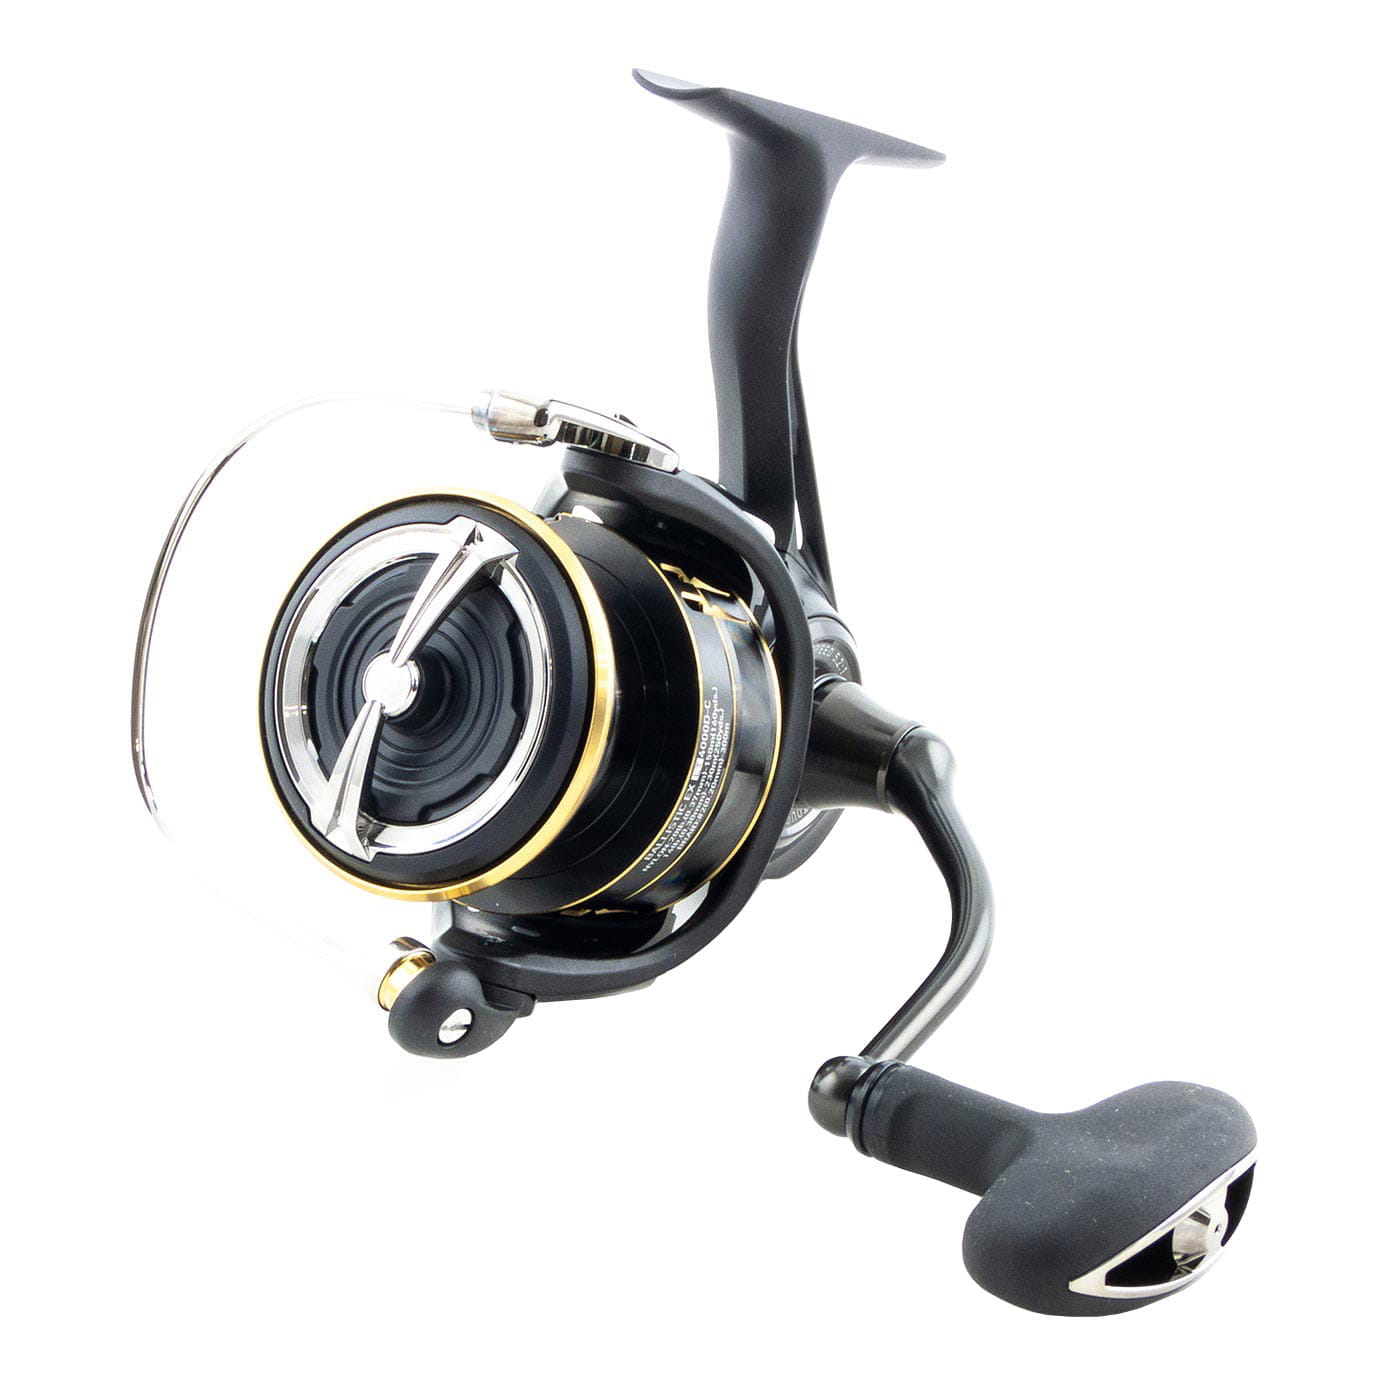 Fin Nor Trophy Spinning Reel